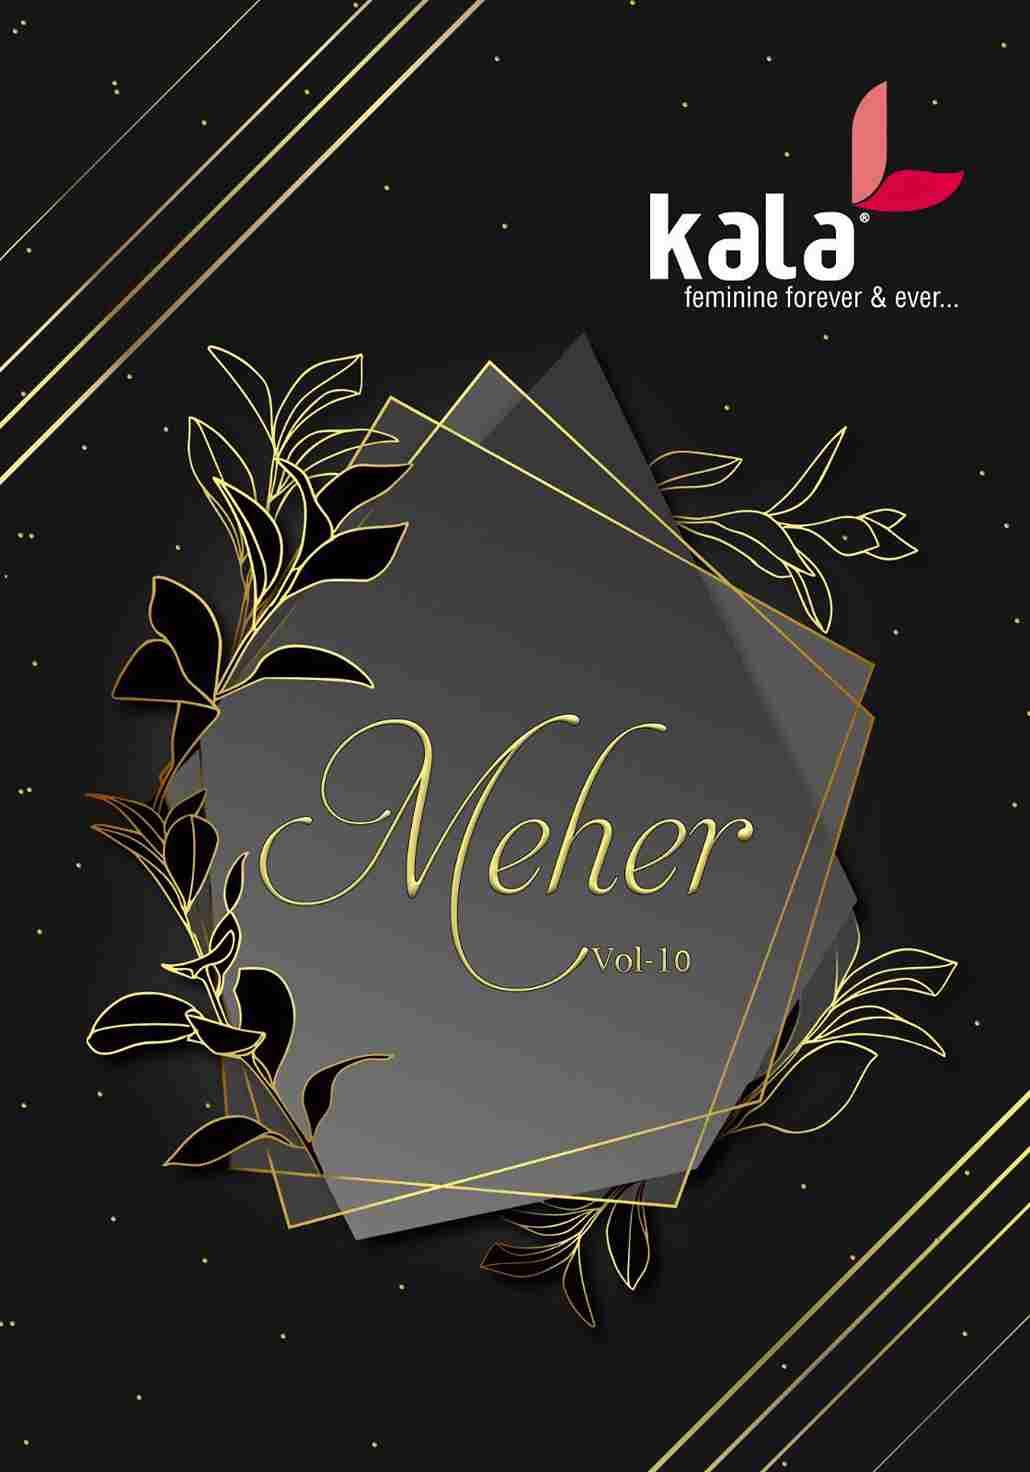 Meher Vol-10 By Kala 5801 To 5812 Series Beautiful Pakistani Suits Stylish Colorful Fancy Casual Wear & Ethnic Wear Premium Cotton Print Dresses At Wholesale Price